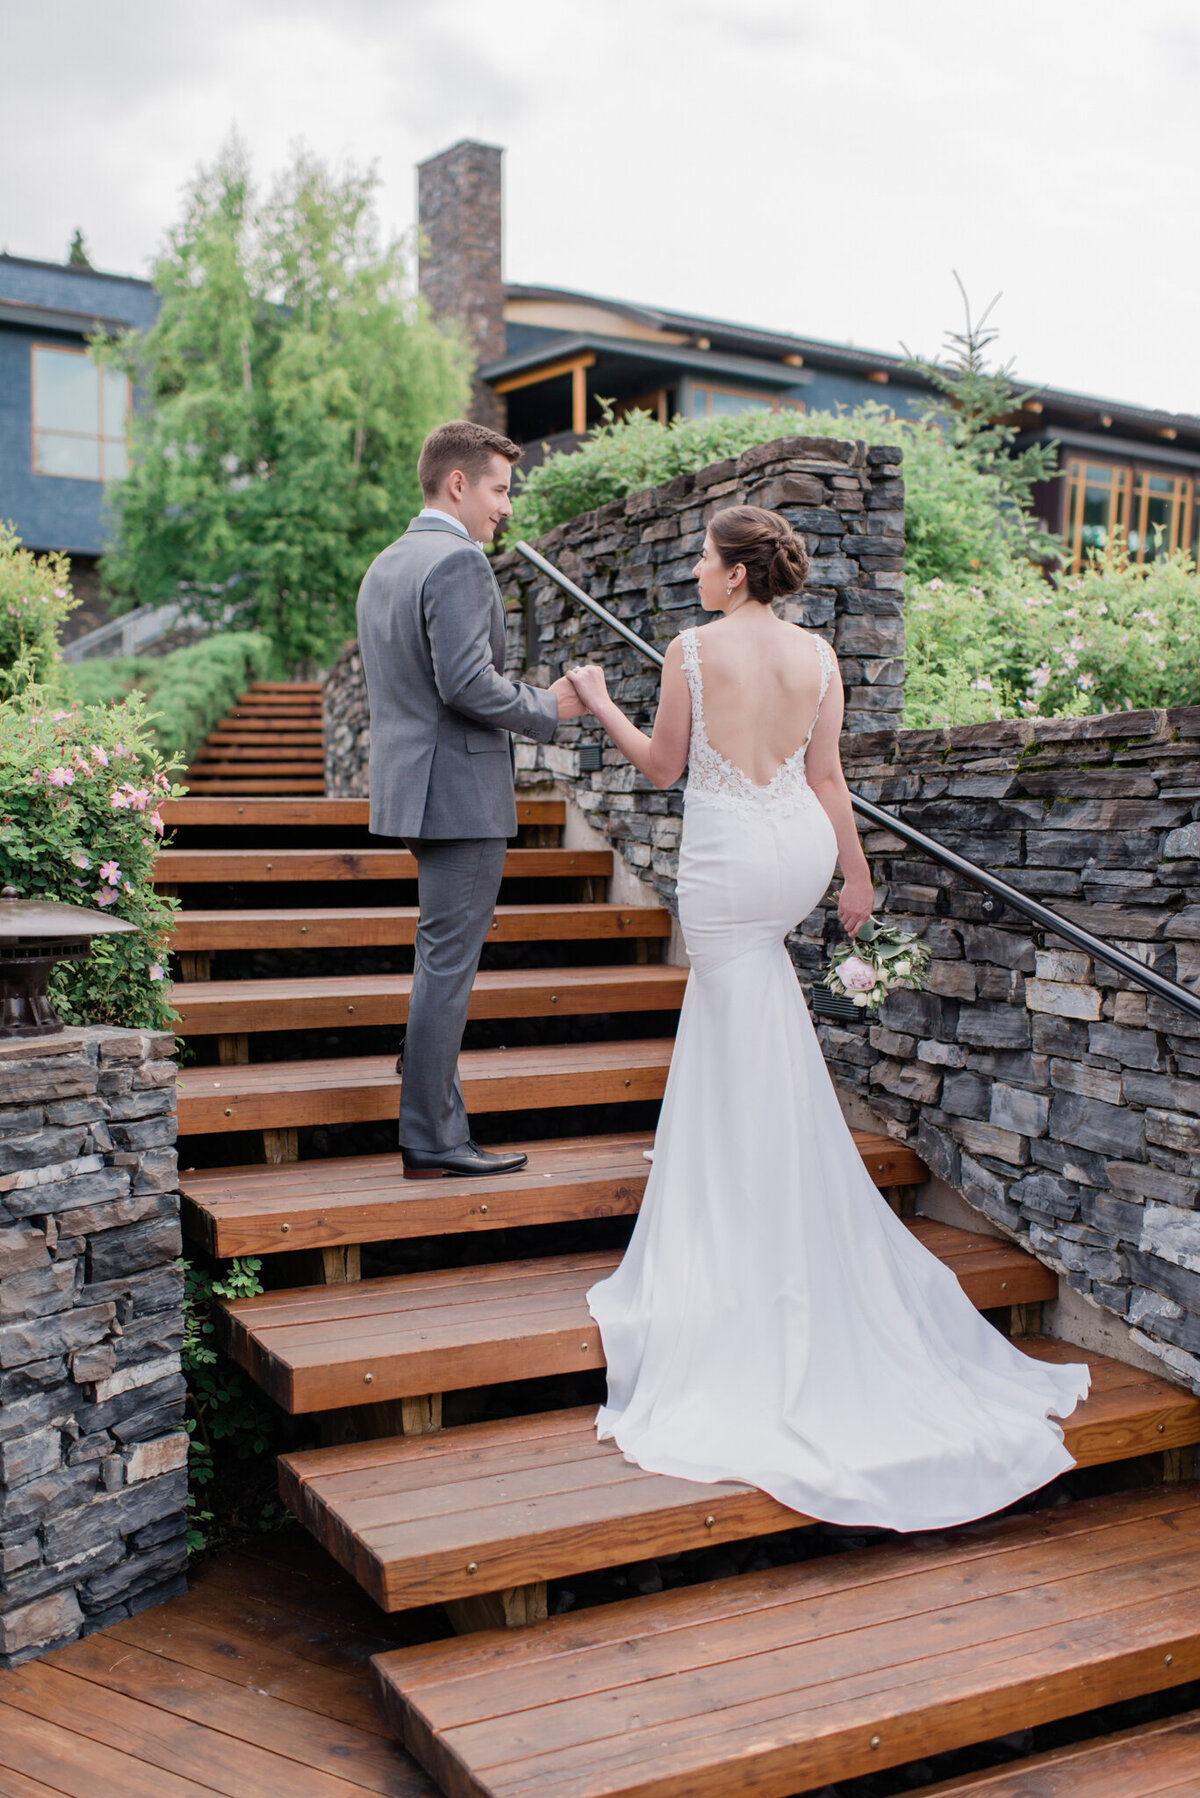 Elegant couple walking up stairs of wedding venue, brides gown trailing on stairs behind her, captured by Kaity Body Photography, elegant film inspired wedding photographer in Calgary, Alberta. Featured on the Bronte Bride Vendor Guide.